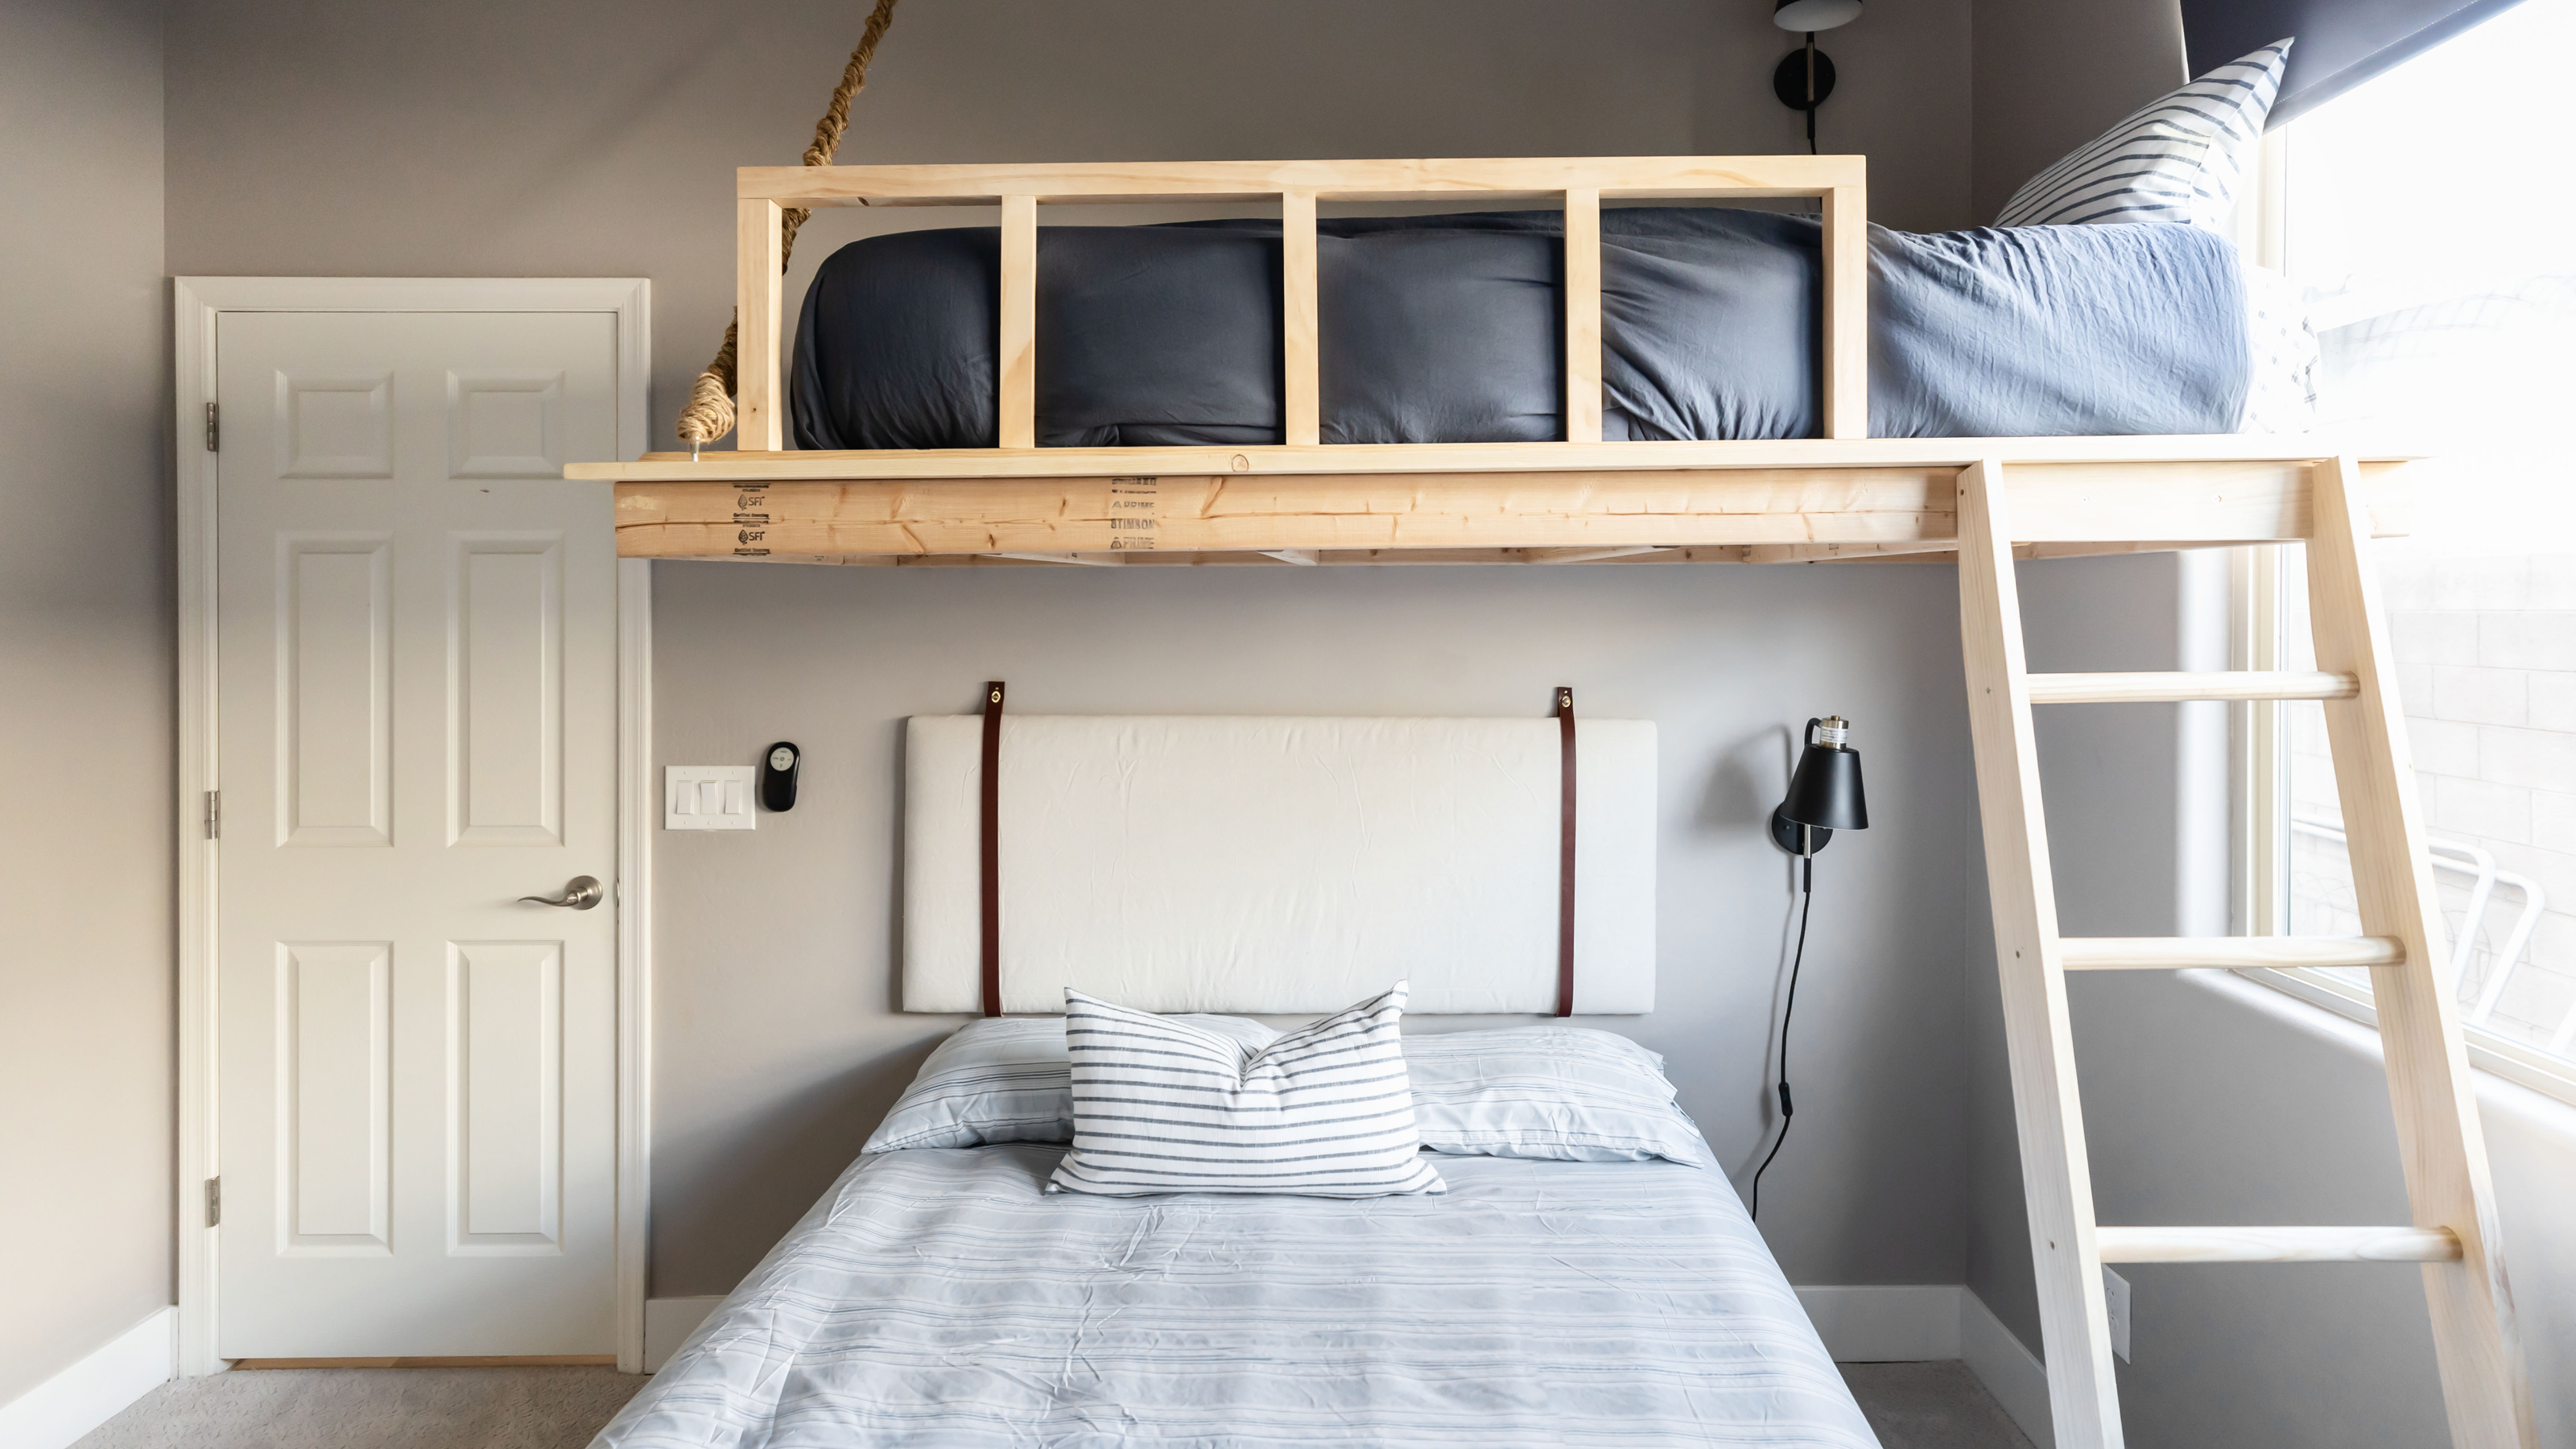 How To Build A Loft Bed Diy With This, Wooden Dowels For Bunk Beds